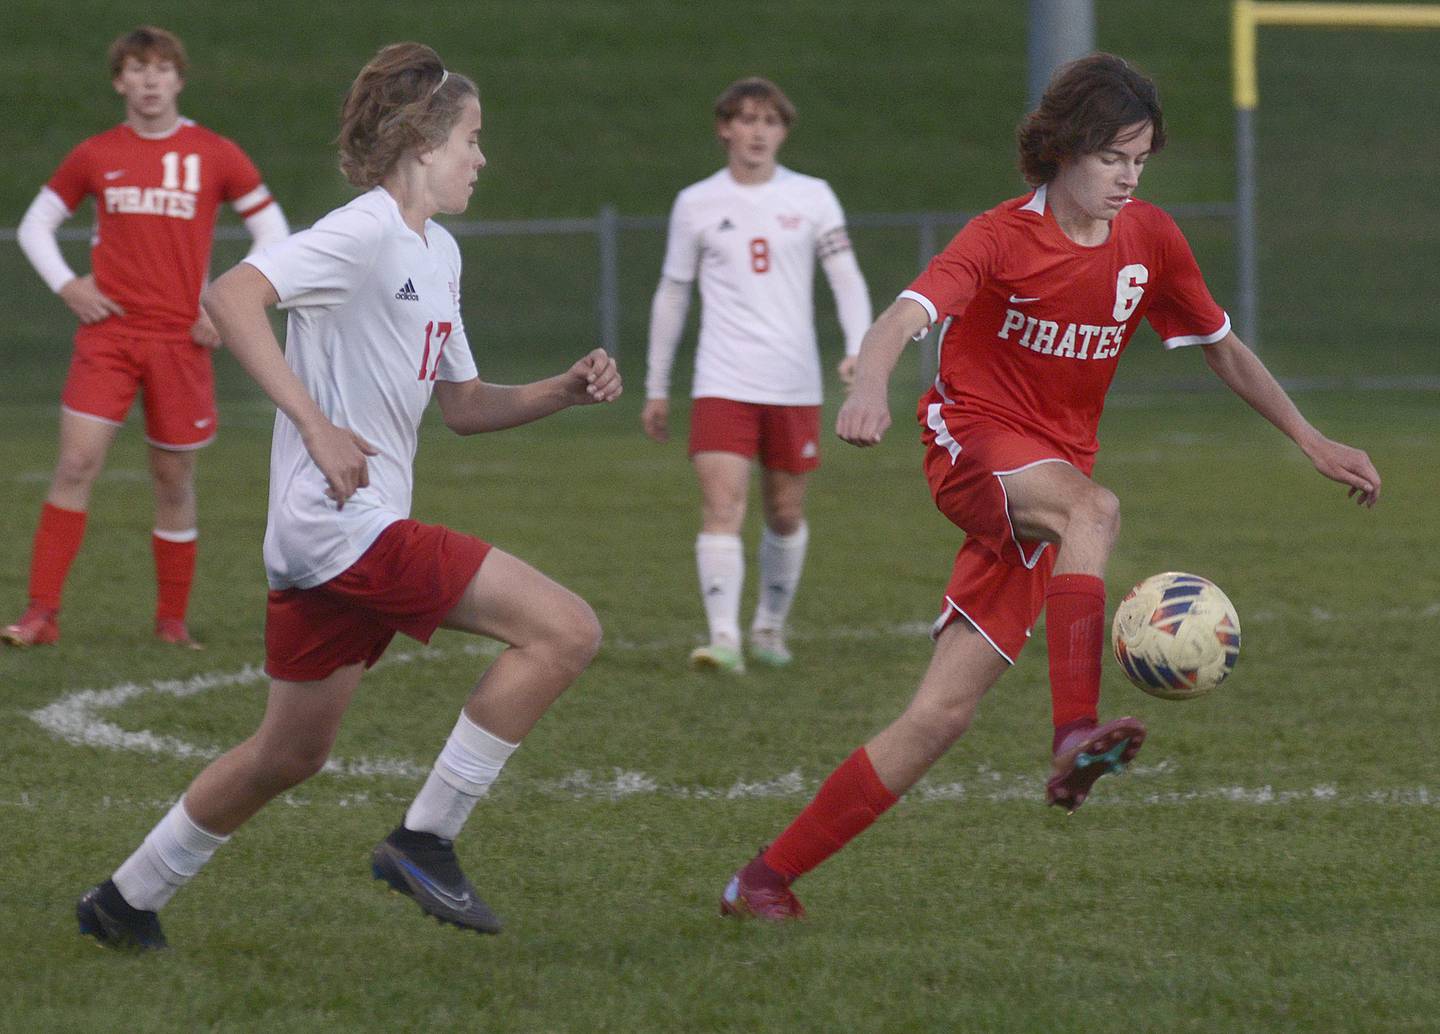 Ottawa’s Collin Lyons gets the ball past Streator’s Dalton Sliker during the first half of Tuesday's match at Ottawa.